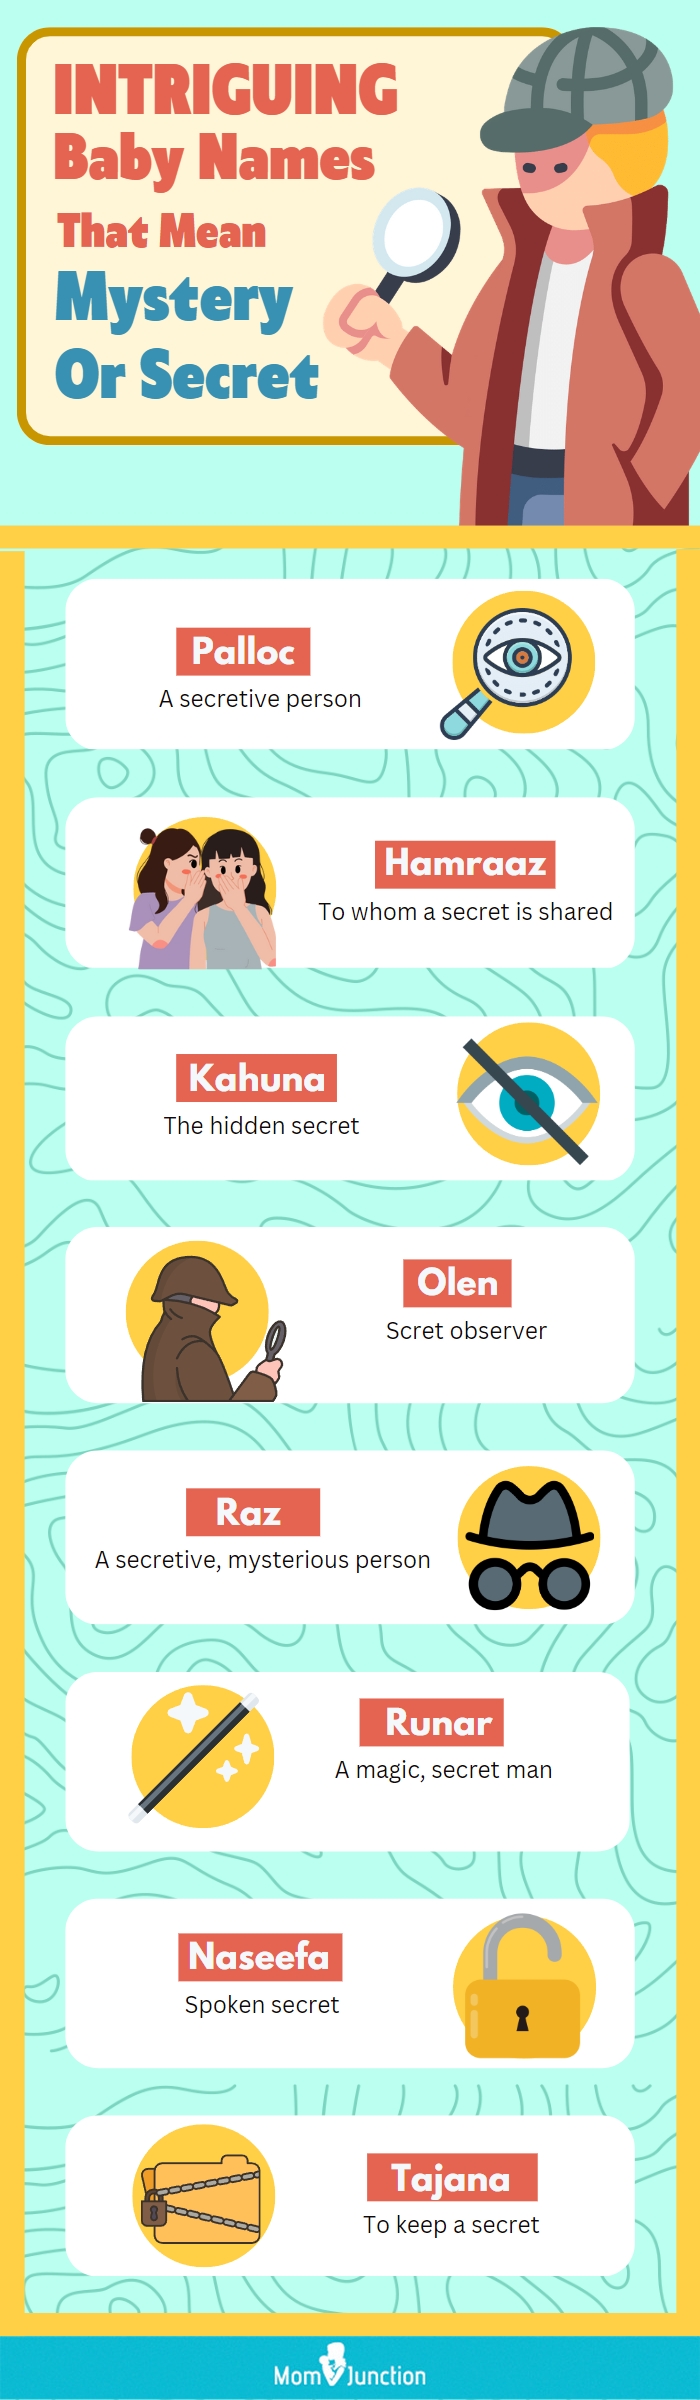 intriguing baby names that mean secret (infographic)